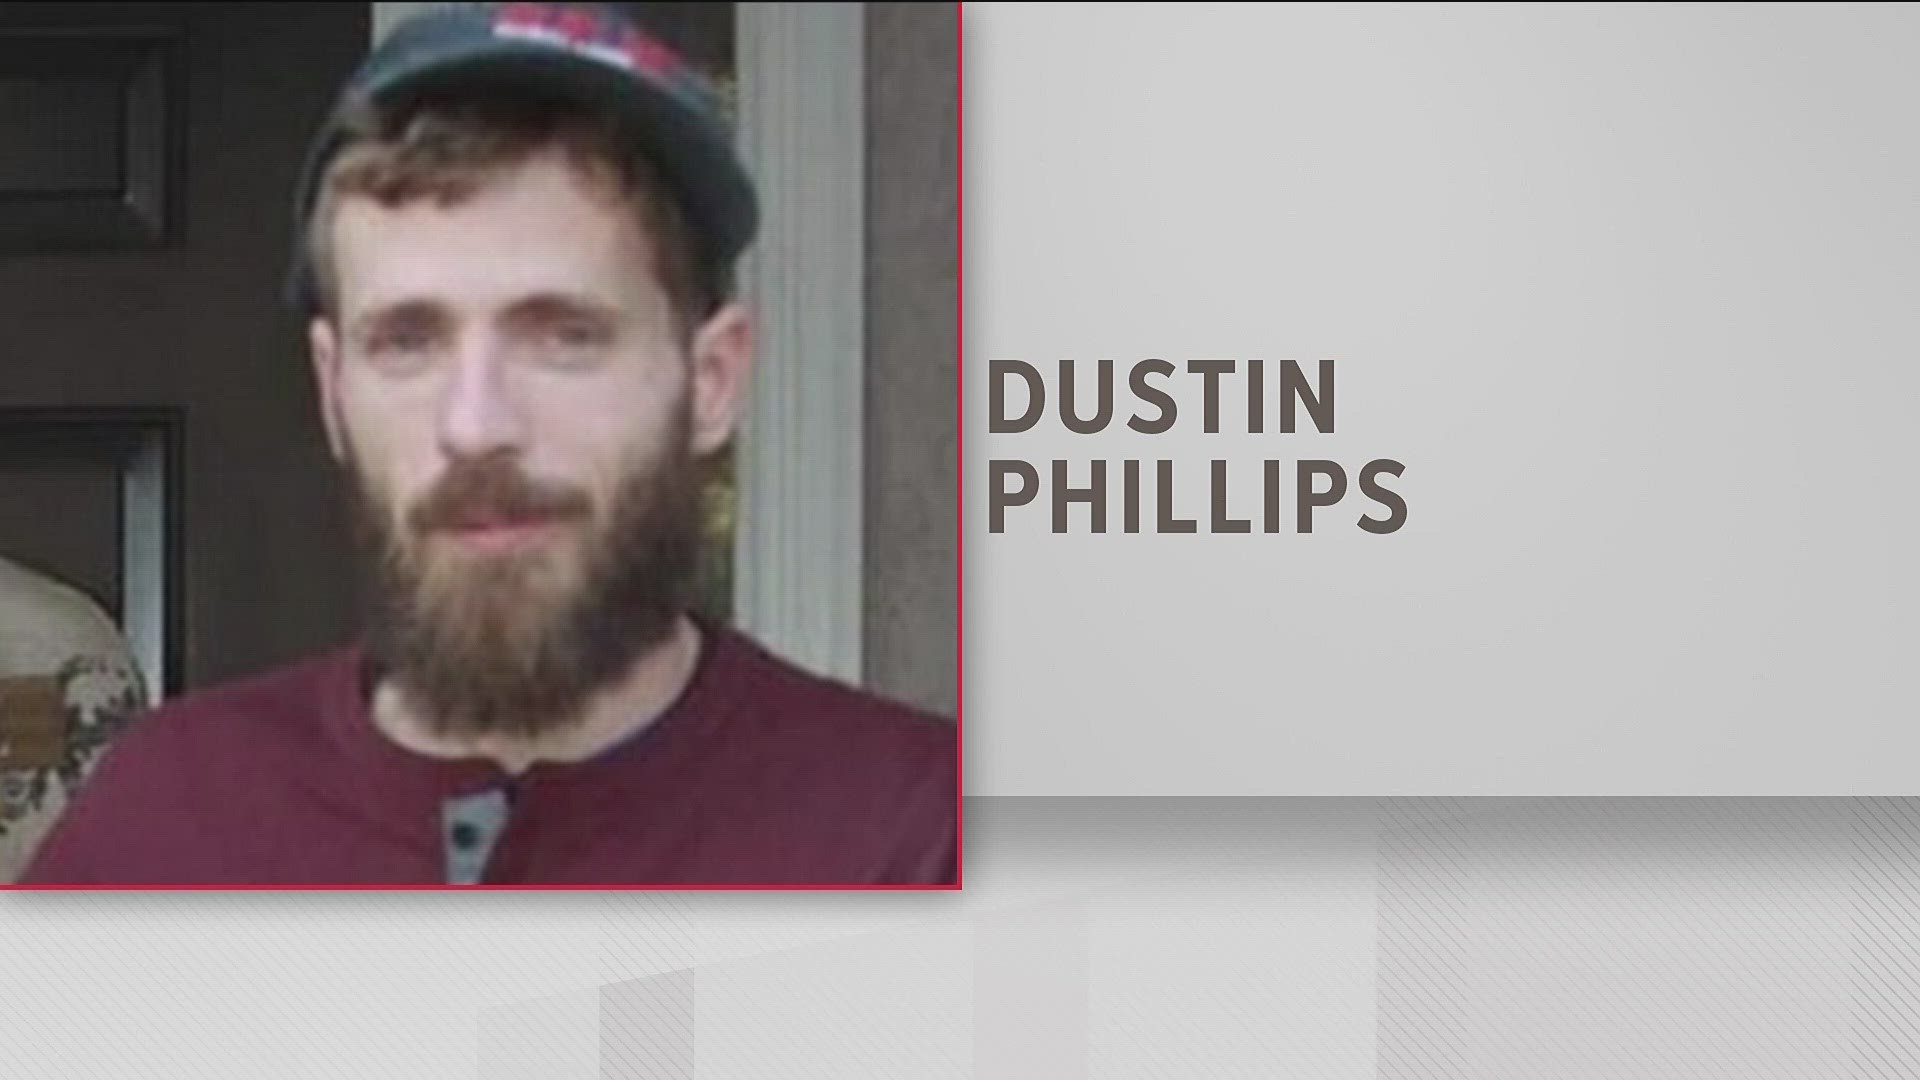 The suspect was identified as Dustin Allen Phillips. Authorities are looking for the "armed and dangerous" murder suspect in the area of Highway 154 and Allison Lane